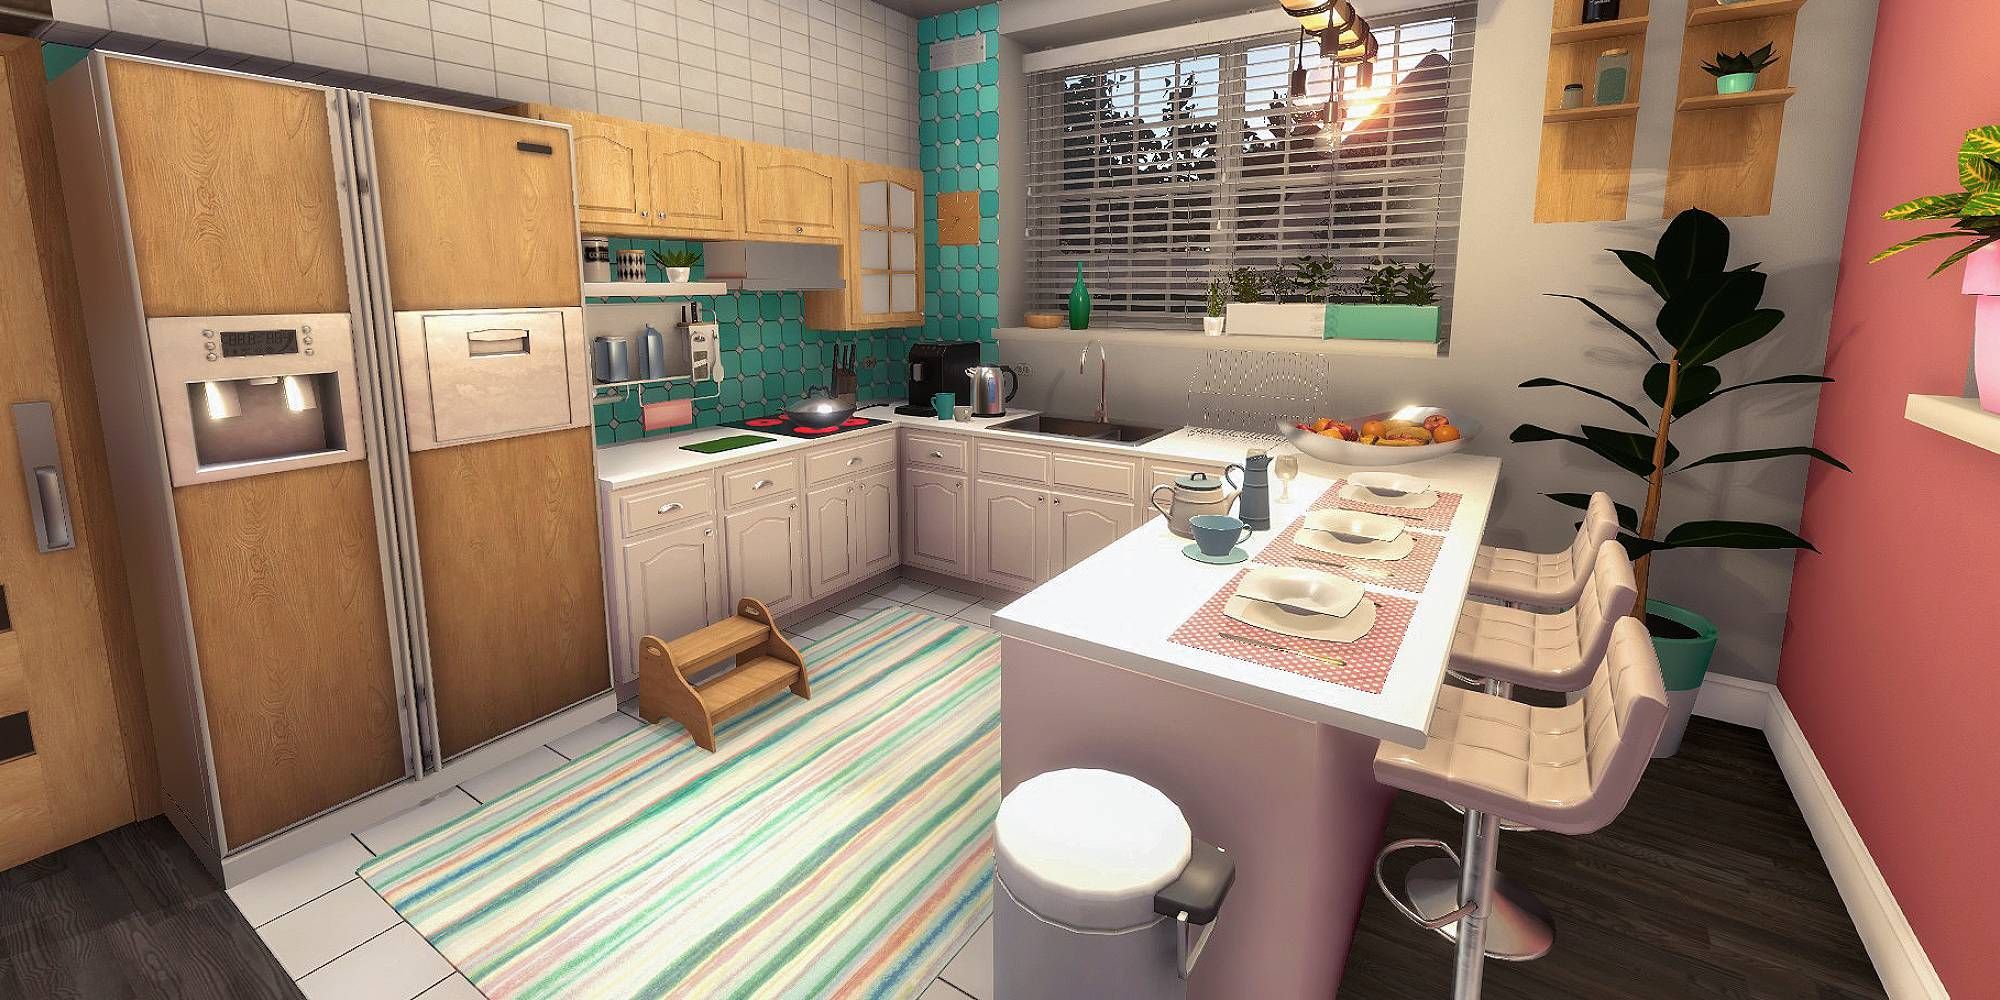 An ornate looking kitchen in House Flipper